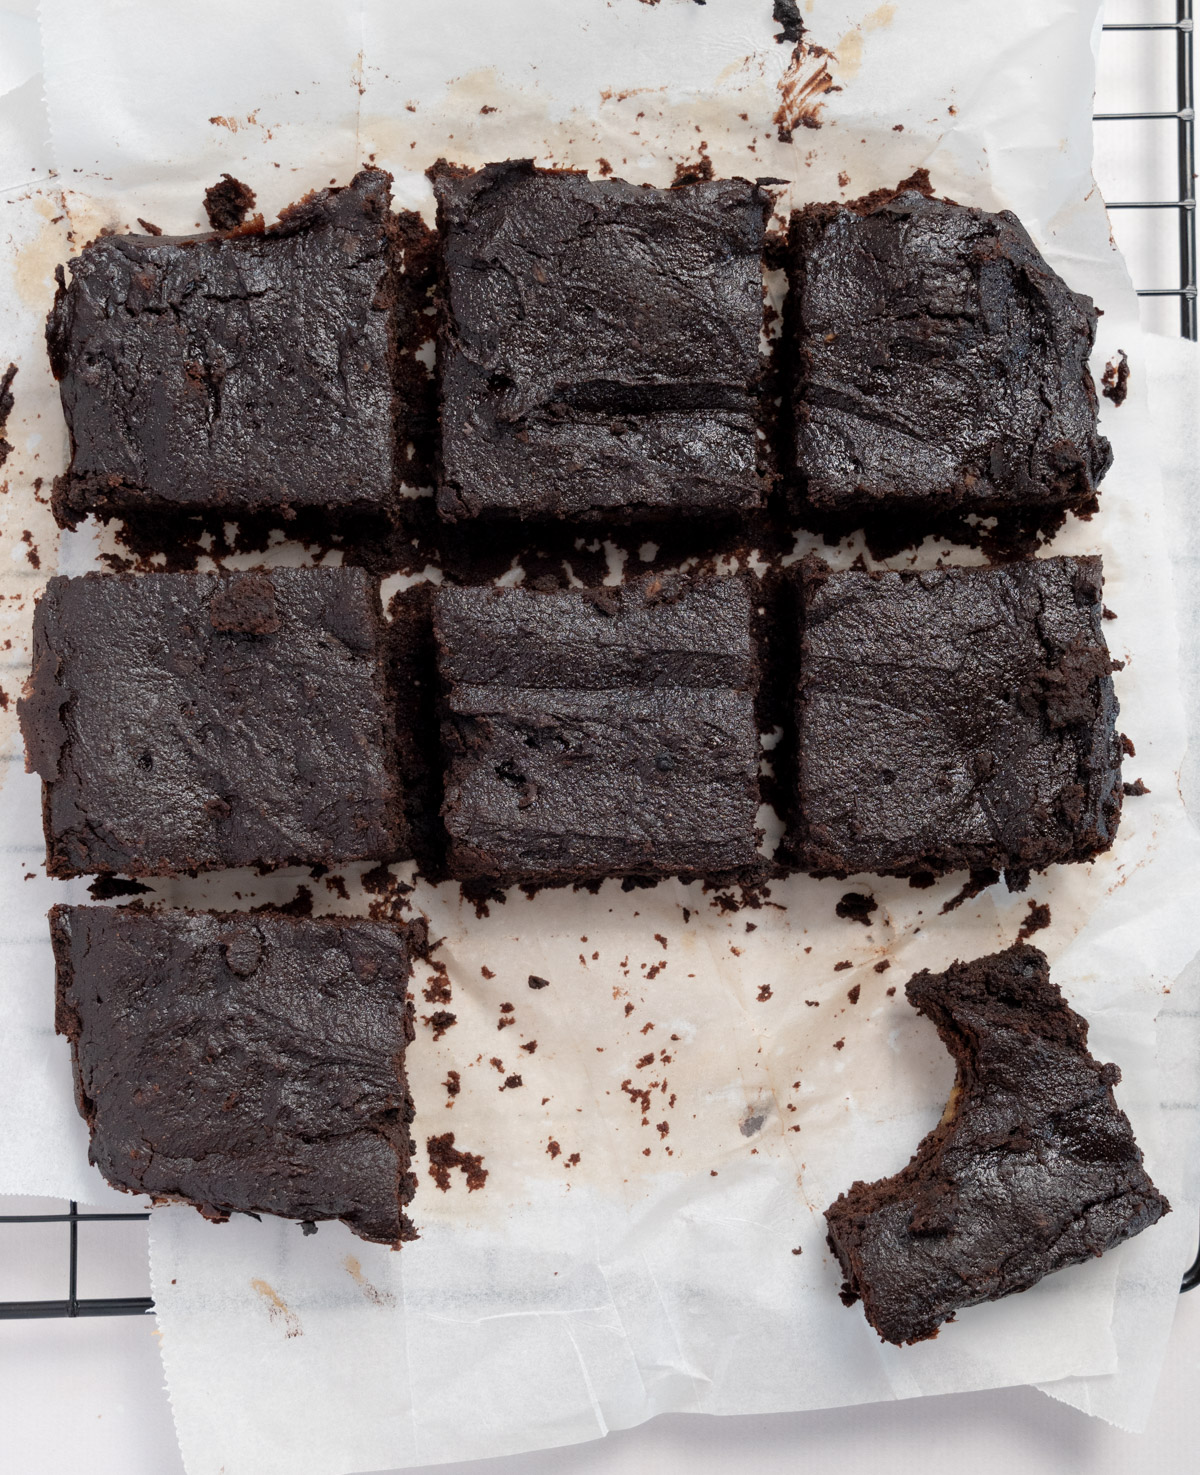 8 squares of brownies laid on baking paper, one with a bite out of it